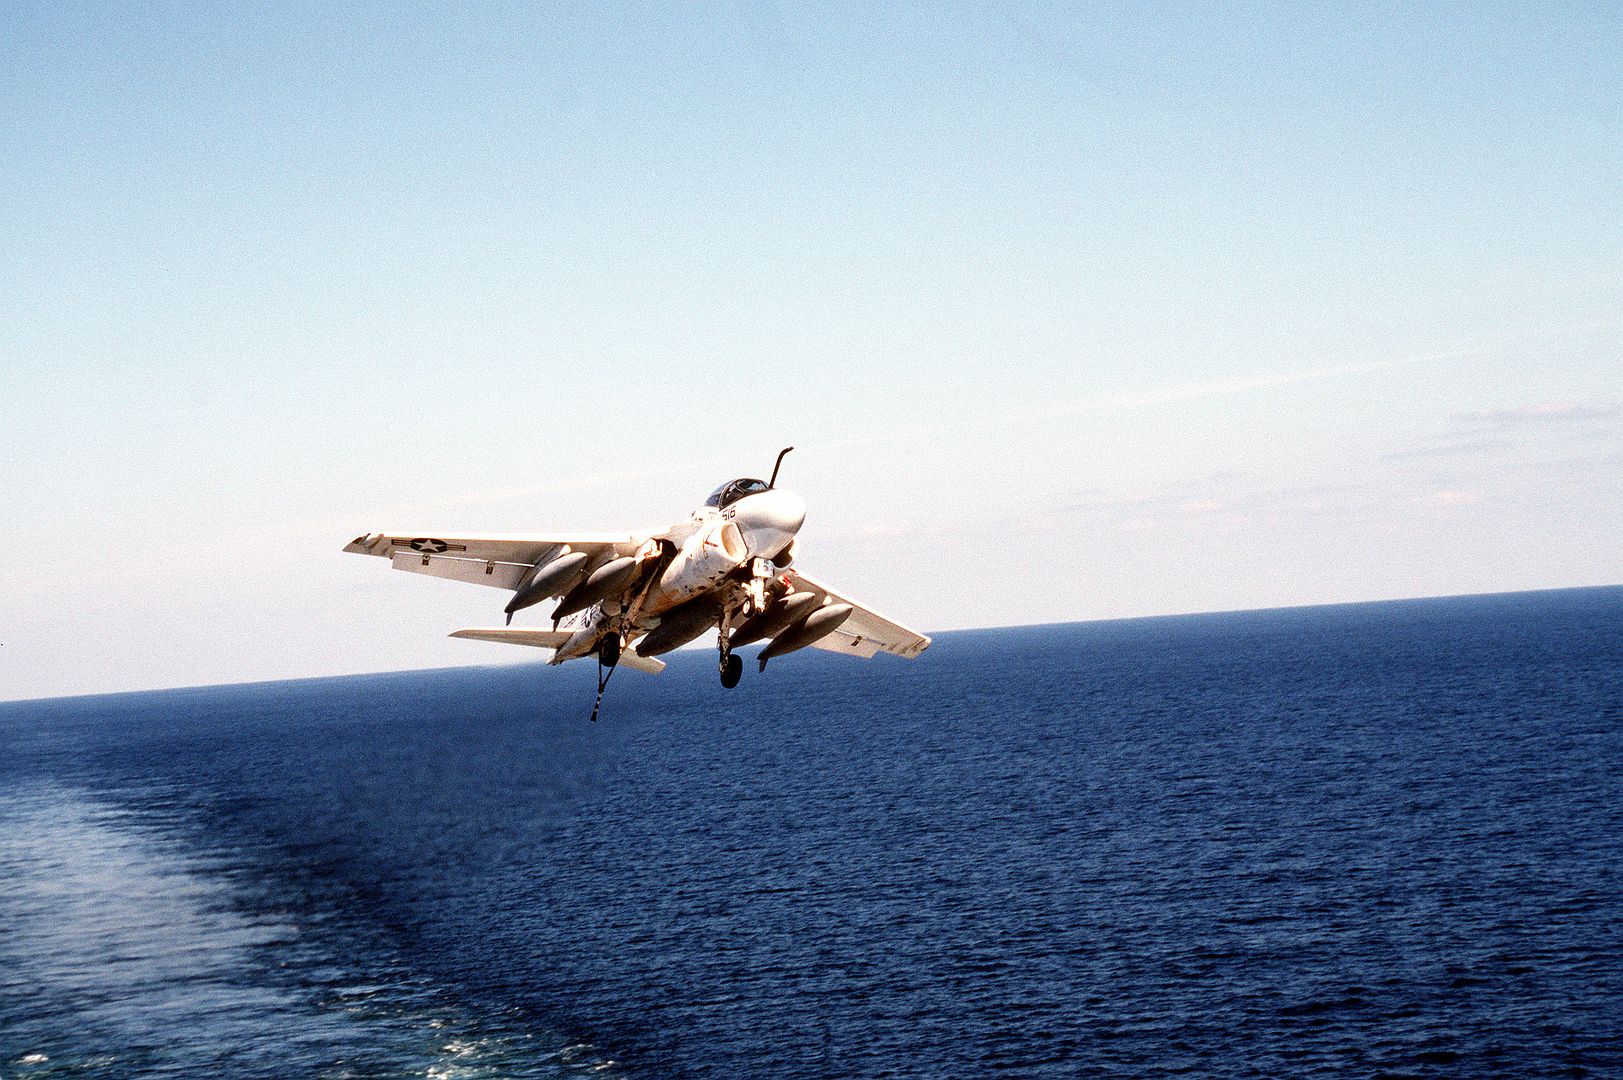 An Attack Squadron 95 KA 6A Intruder Aircraft Breaks Out Of The Landing Pattern After Being Waved Off By The Landing Signal Officer Aboard The Flight Deck Of The Nuclear Powered Aircraft Carrier USS ABRAHAM LINCOLN